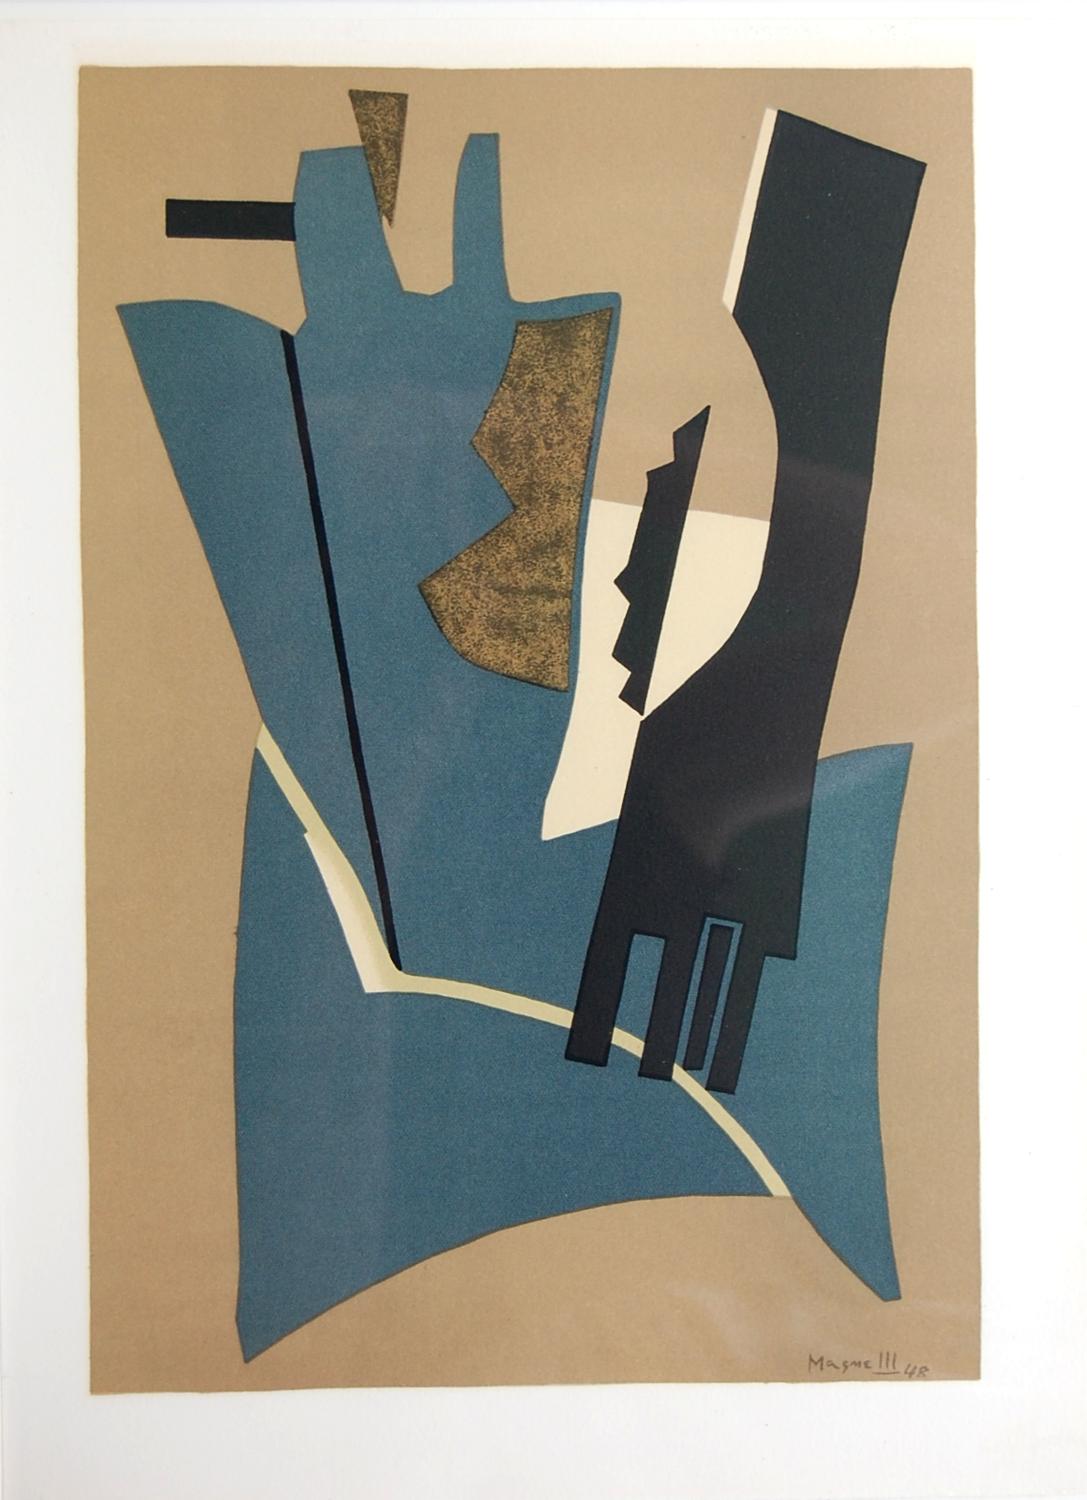 Alberto Magnelli - Composition in Teal